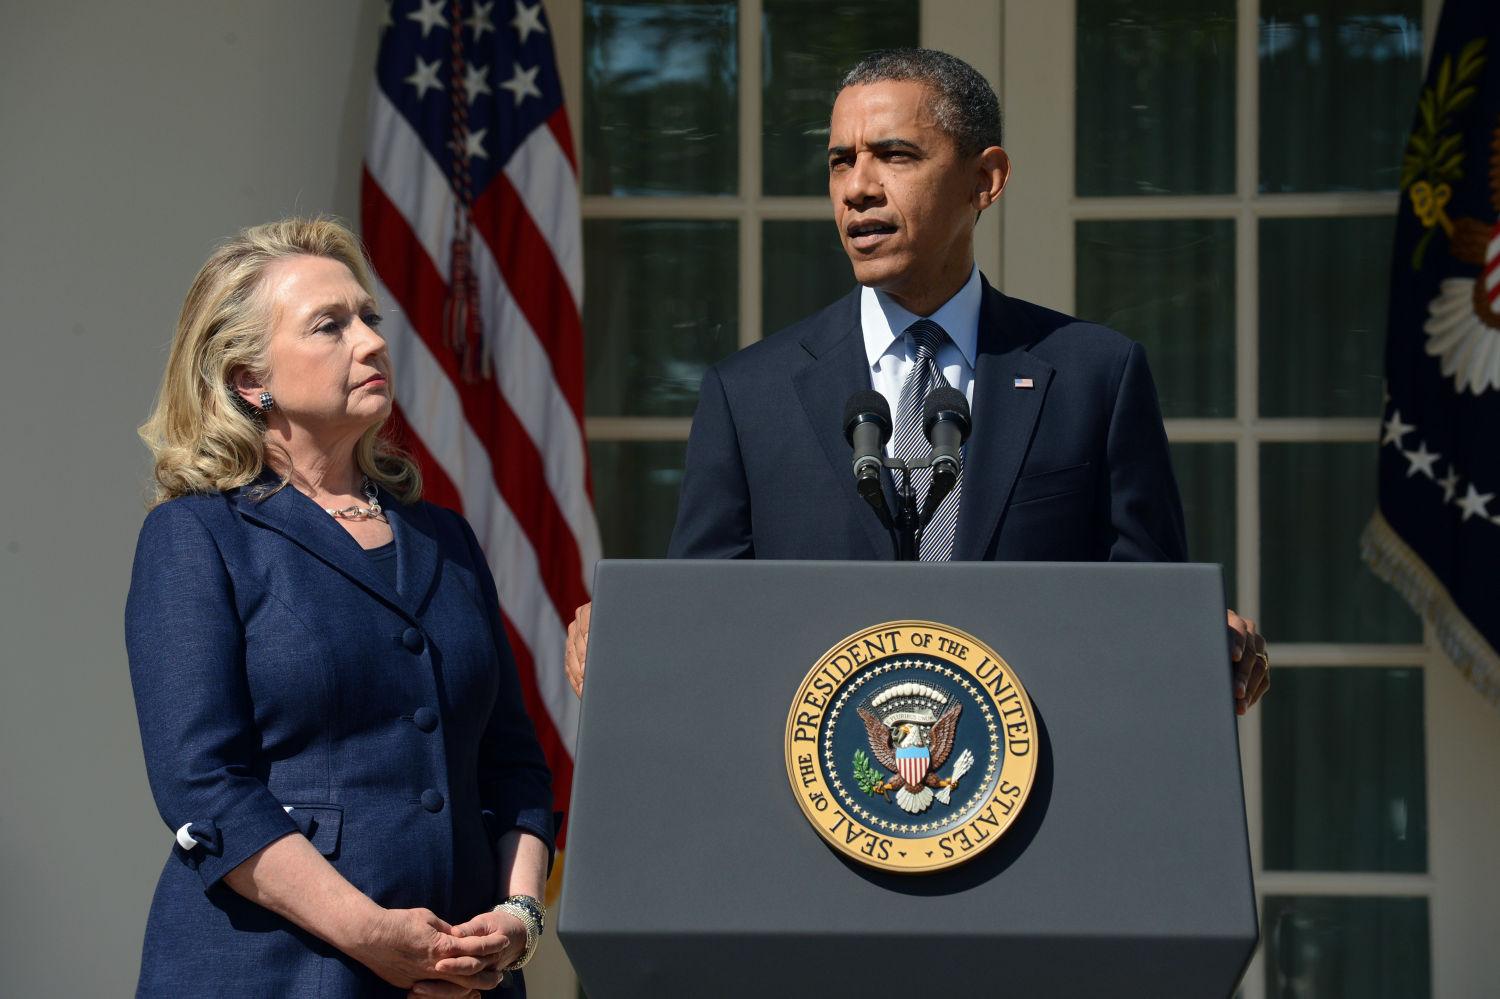 President Barack Obama delivers remarks beside Secretary of State Hillary Clinton, left, on the killing of US ambassador to Libya, Christopher Stevens, and three embassy staff, Wednesday, September 12, 2012, in the Rose Garden of the White House in Washington. (Pool photo by Michael Reynolds/EPA via Abaca Press/MCT)